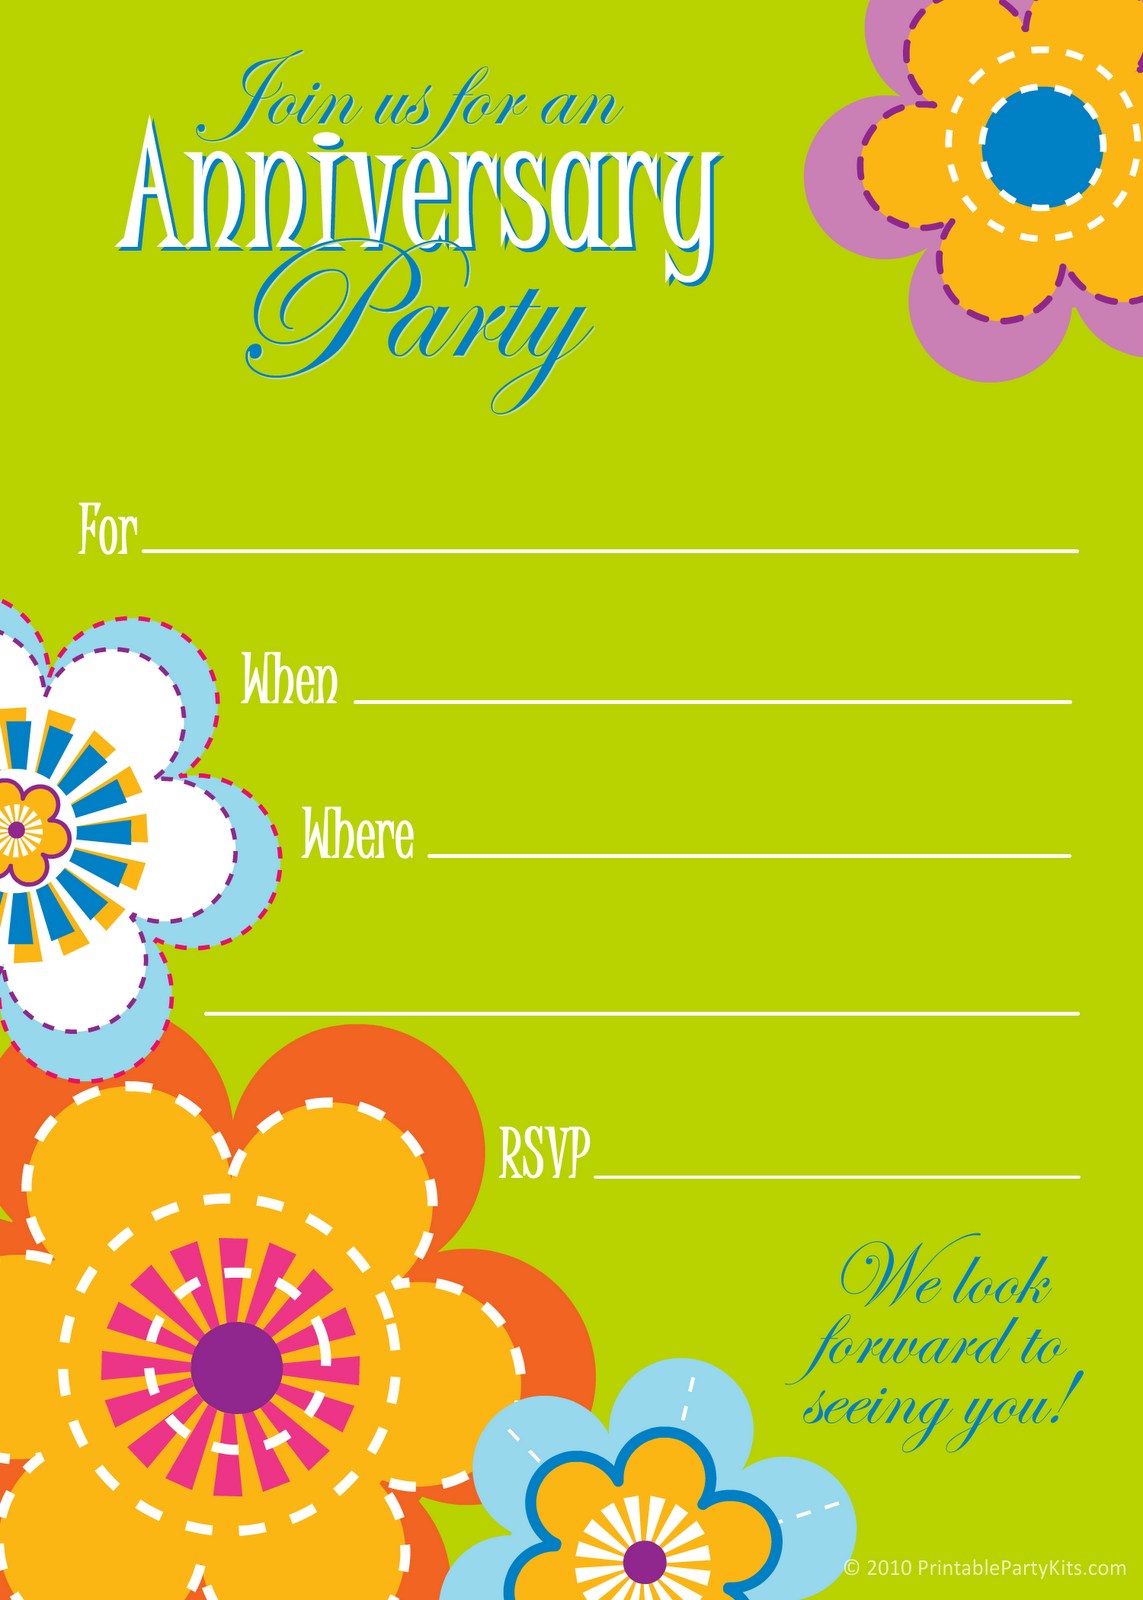 Free Printable Party Invitations: Wedding Anniversary Party Announcement Design